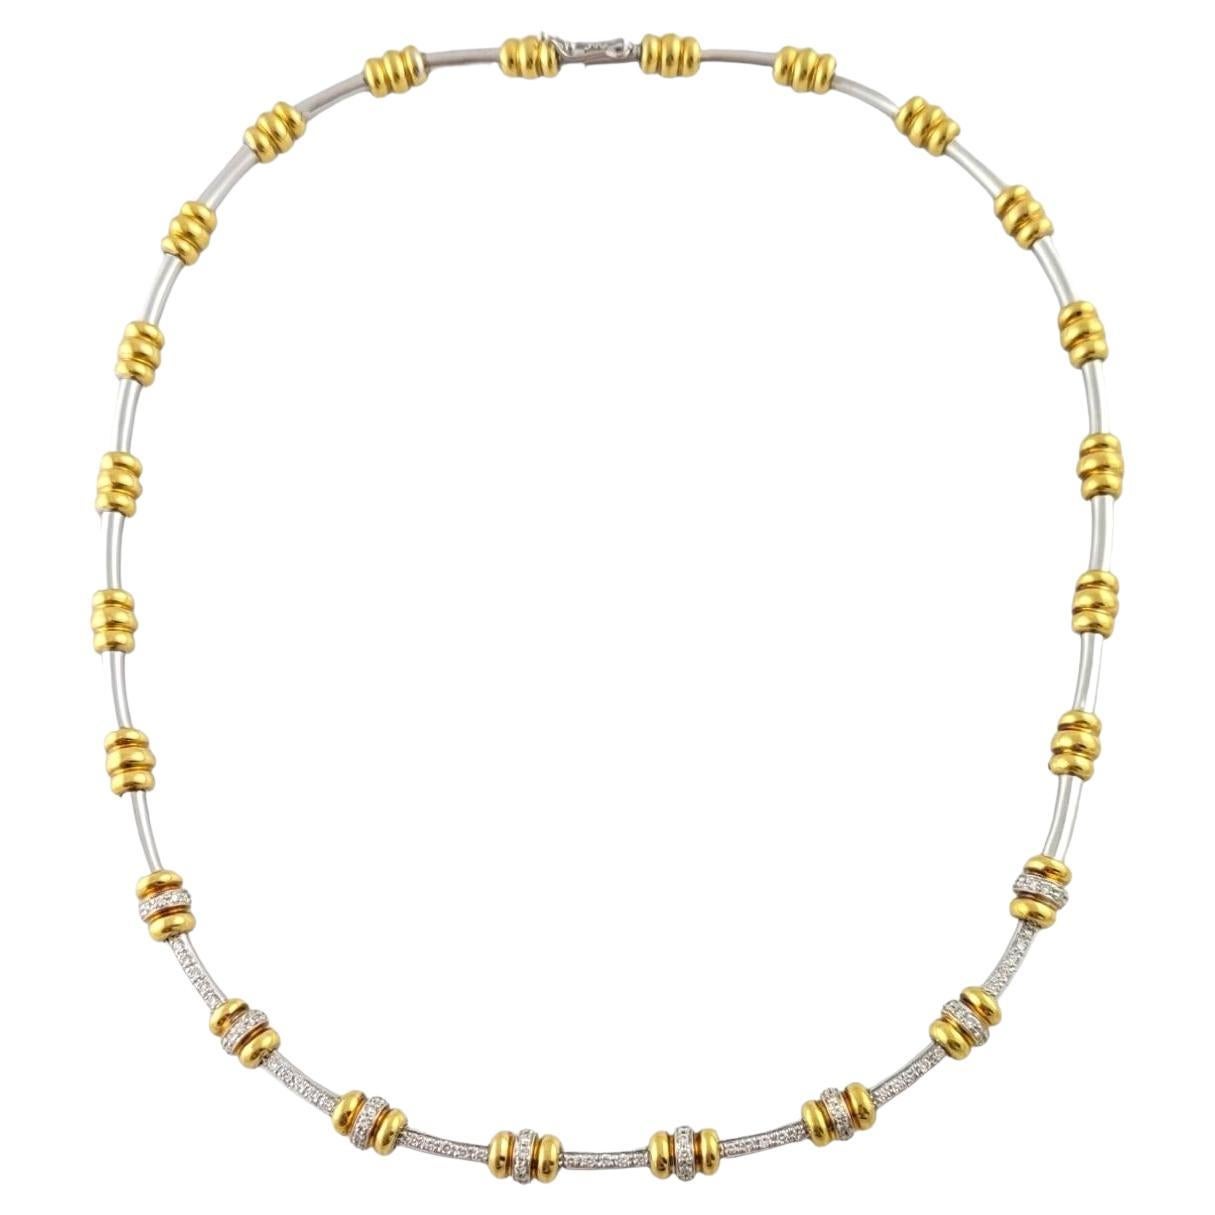 Roberto Coin 18K White and Yellow Gold Diamond Choker Collar Necklace #16961 For Sale